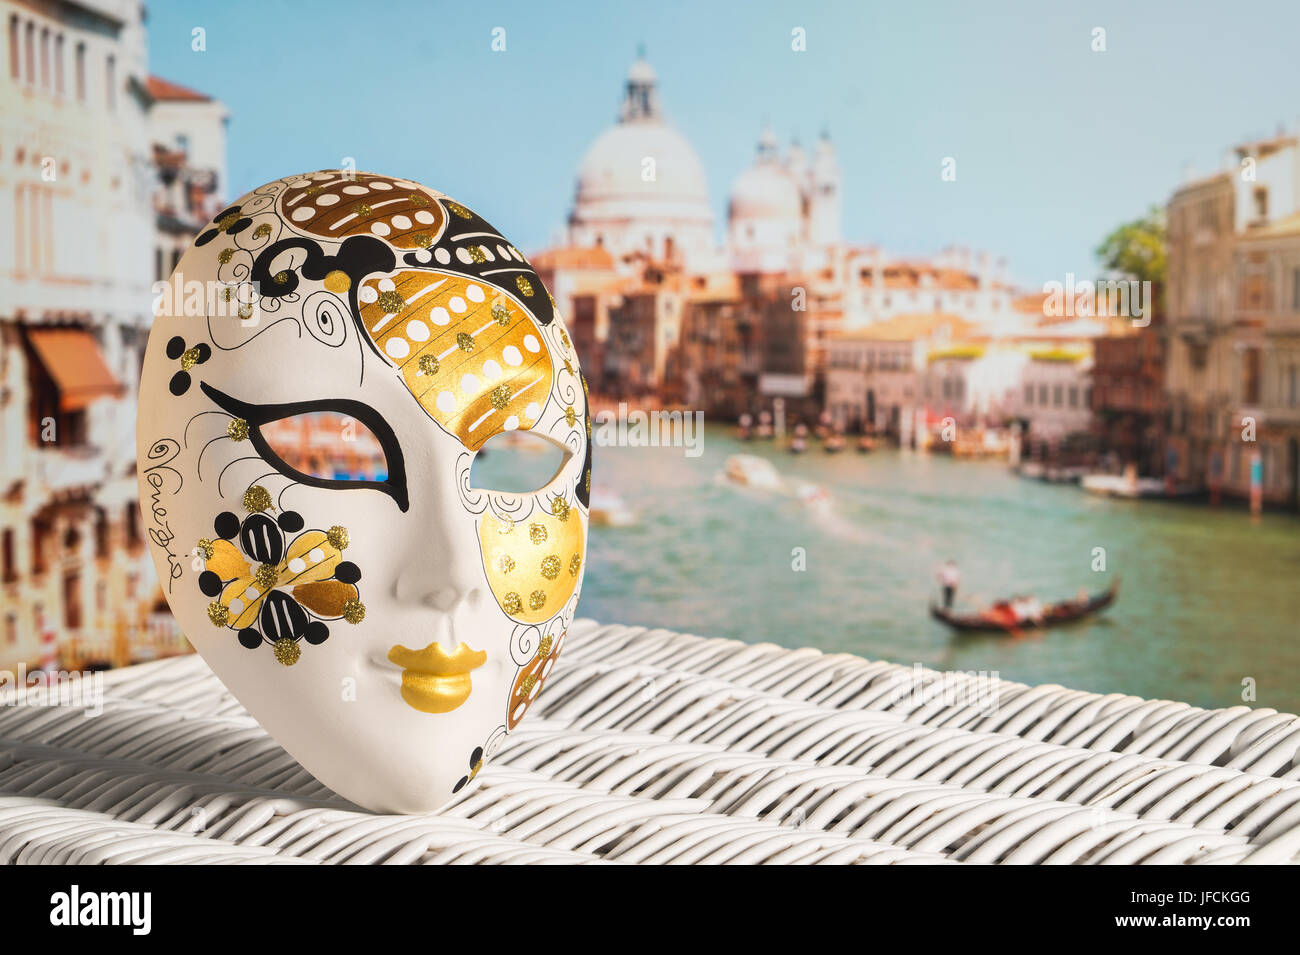 Venetian mask with Canal Grande and Santa Maria della Salute church in the background. Traditional souvenir and beautiful view to the gondola. Stock Photo